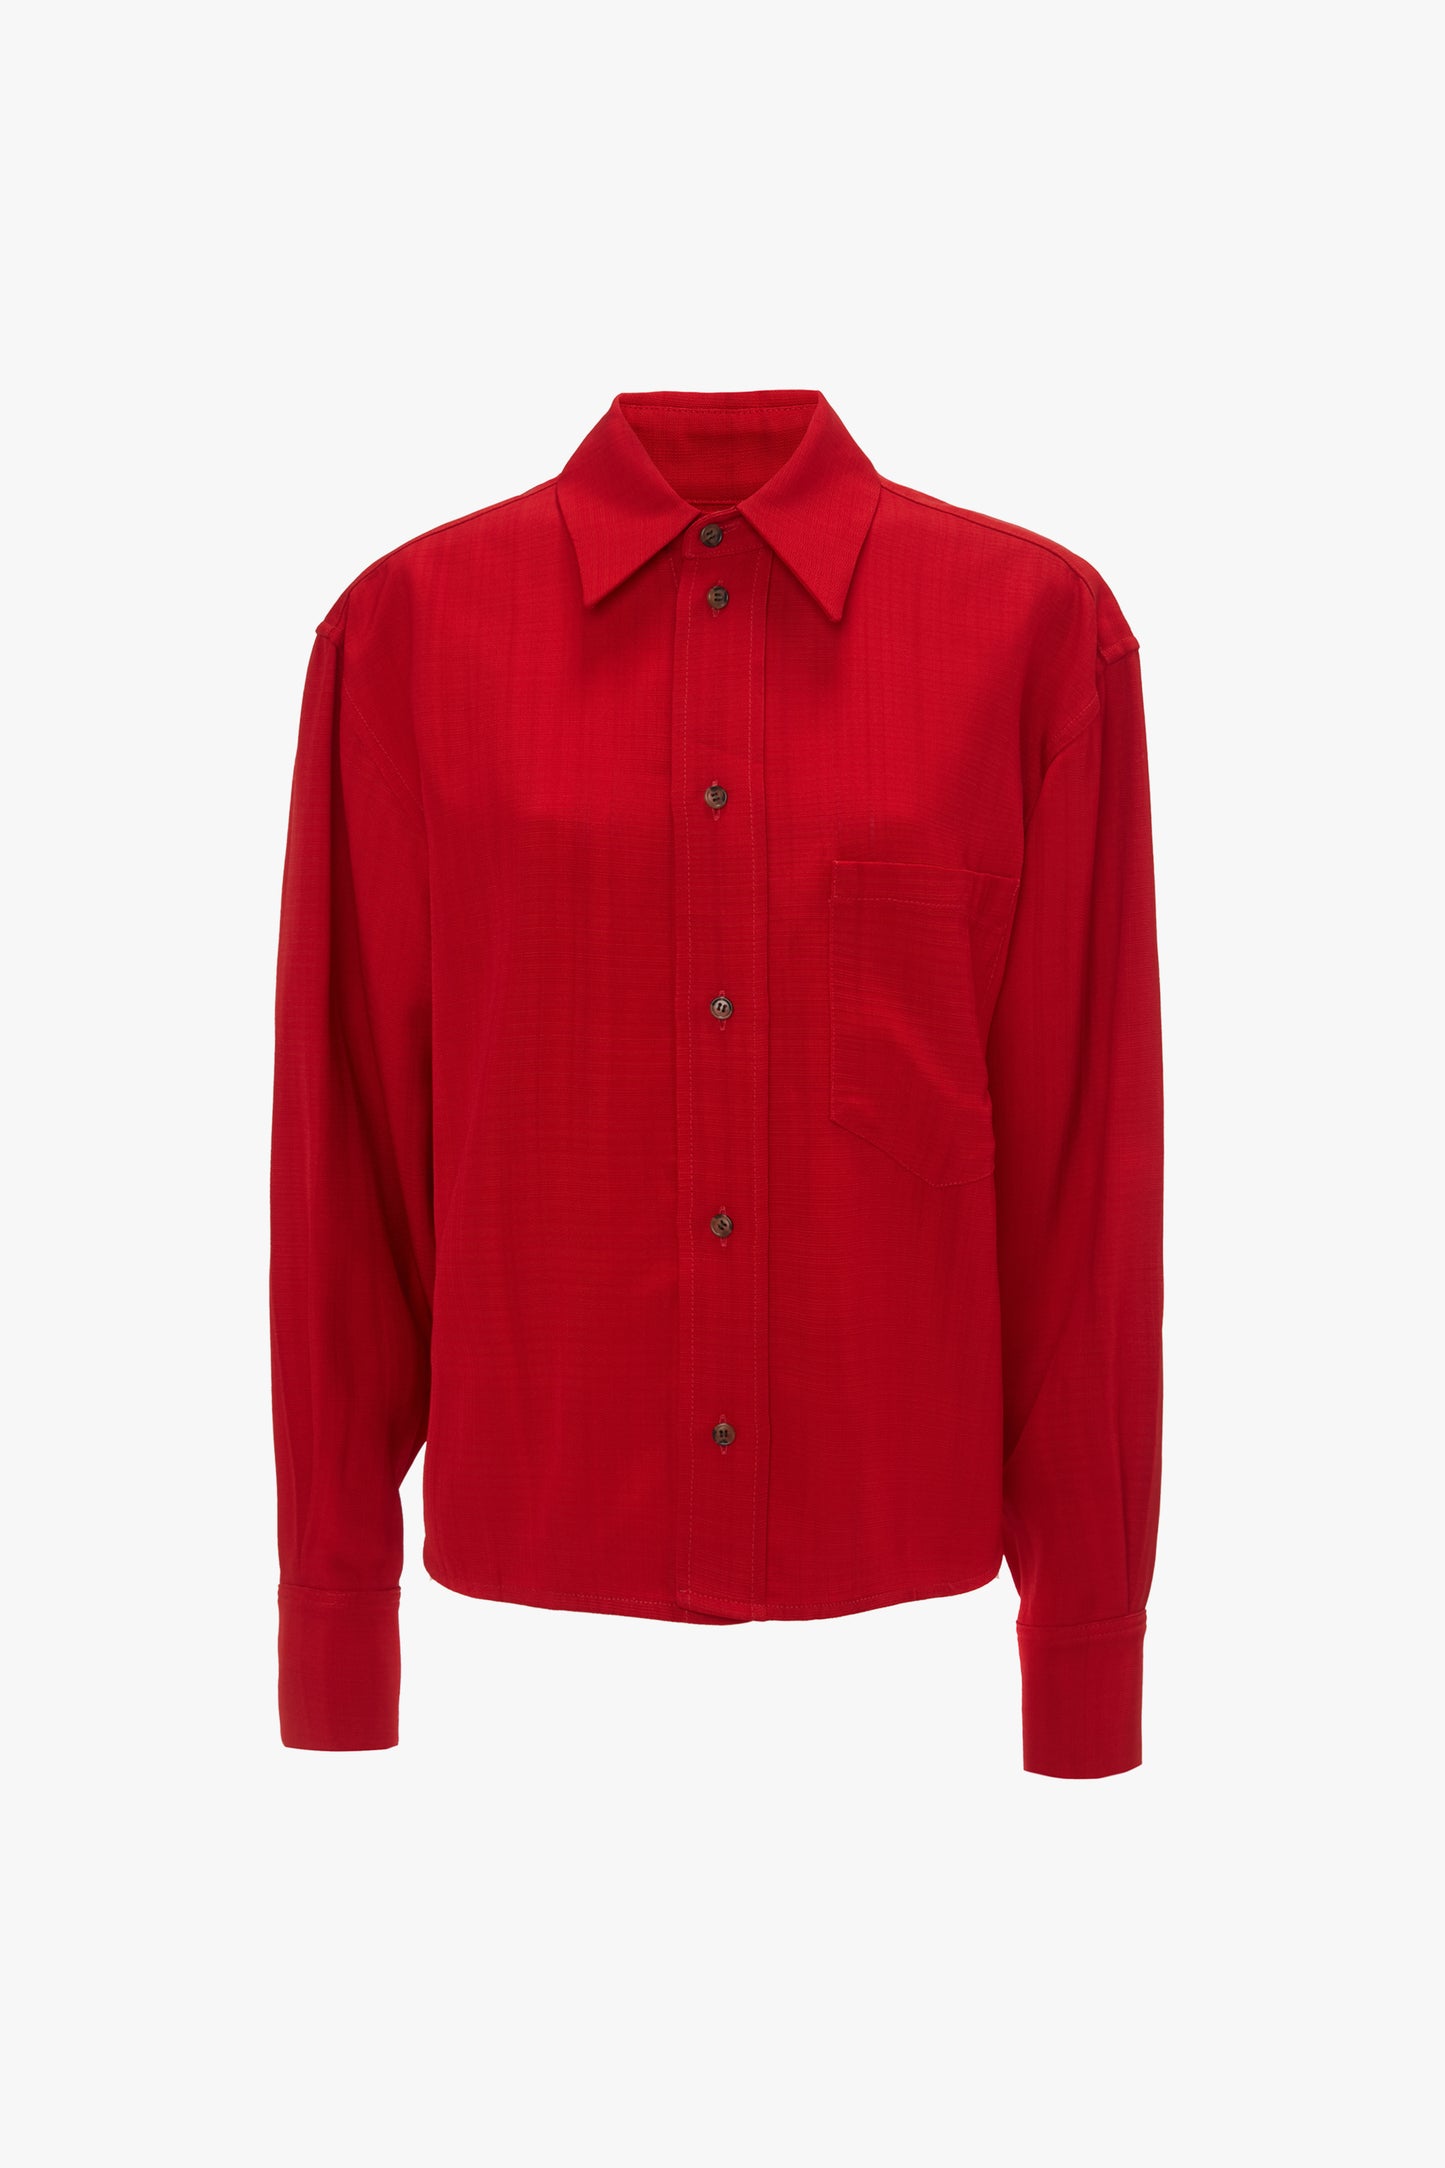 A Victoria Beckham Cropped Long Sleeve Shirt In Carmine with a front pocket on the left side, featuring a masculine-inspired design, shown against a white background.